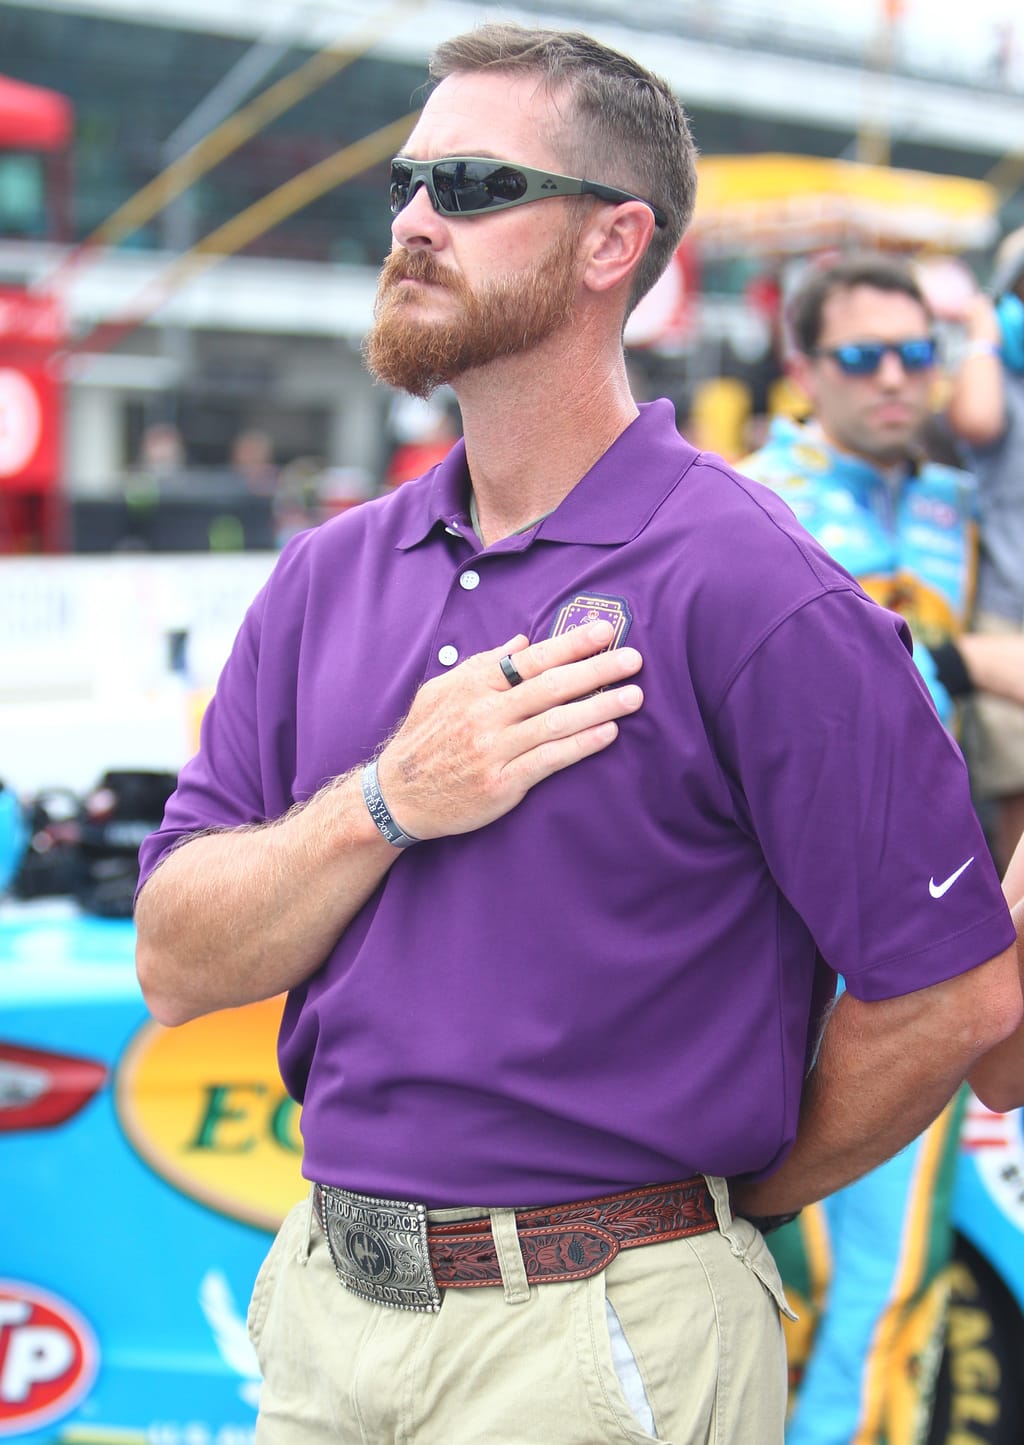 INDIANAPOLIS, IN - JULY 26:  Crown Royal "Your Hero's Name Here" winner and Brickyard 400 race namesake Jeff Kyle visits Indianapolis Motor Speedway July 26, 2015 in Indianapolis, Indiana.  (Photo by Marianna Massey/Getty Images for Crown Royal) *** Local Caption *** Jeff Kyle